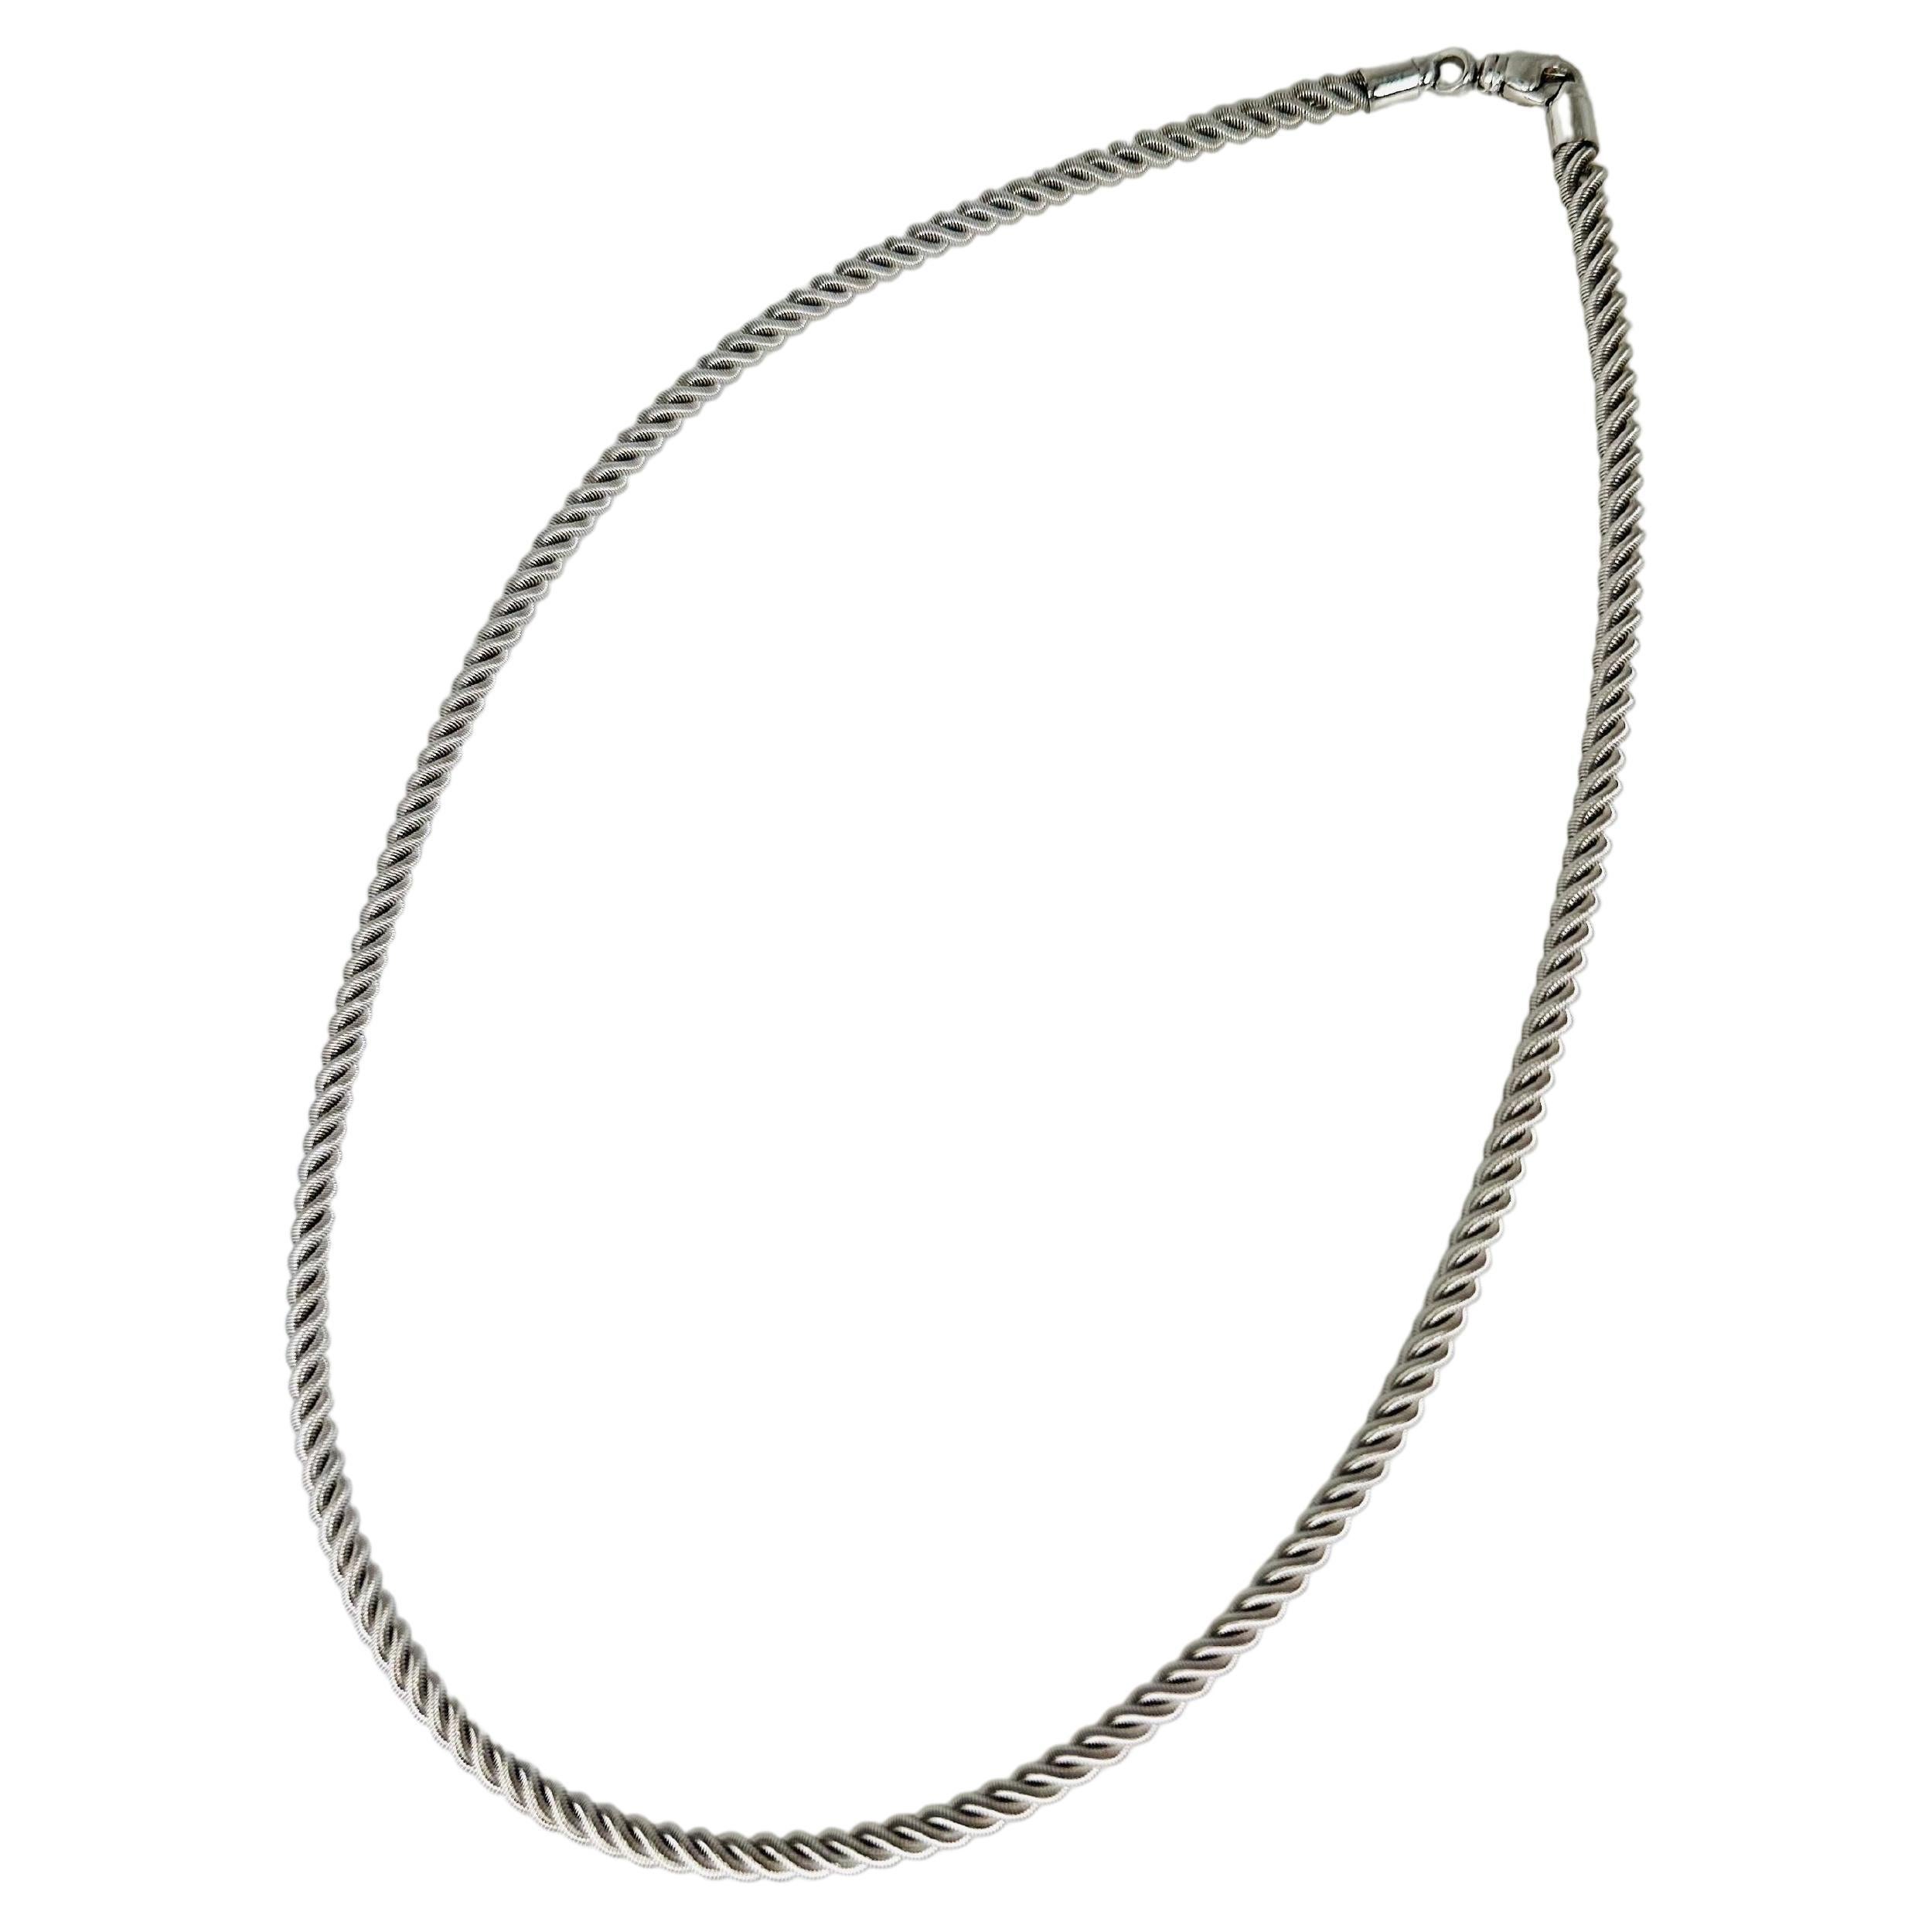 Exceptional 18KT white gold chain necklace 18 inches unique twisted fancy chain For Sale